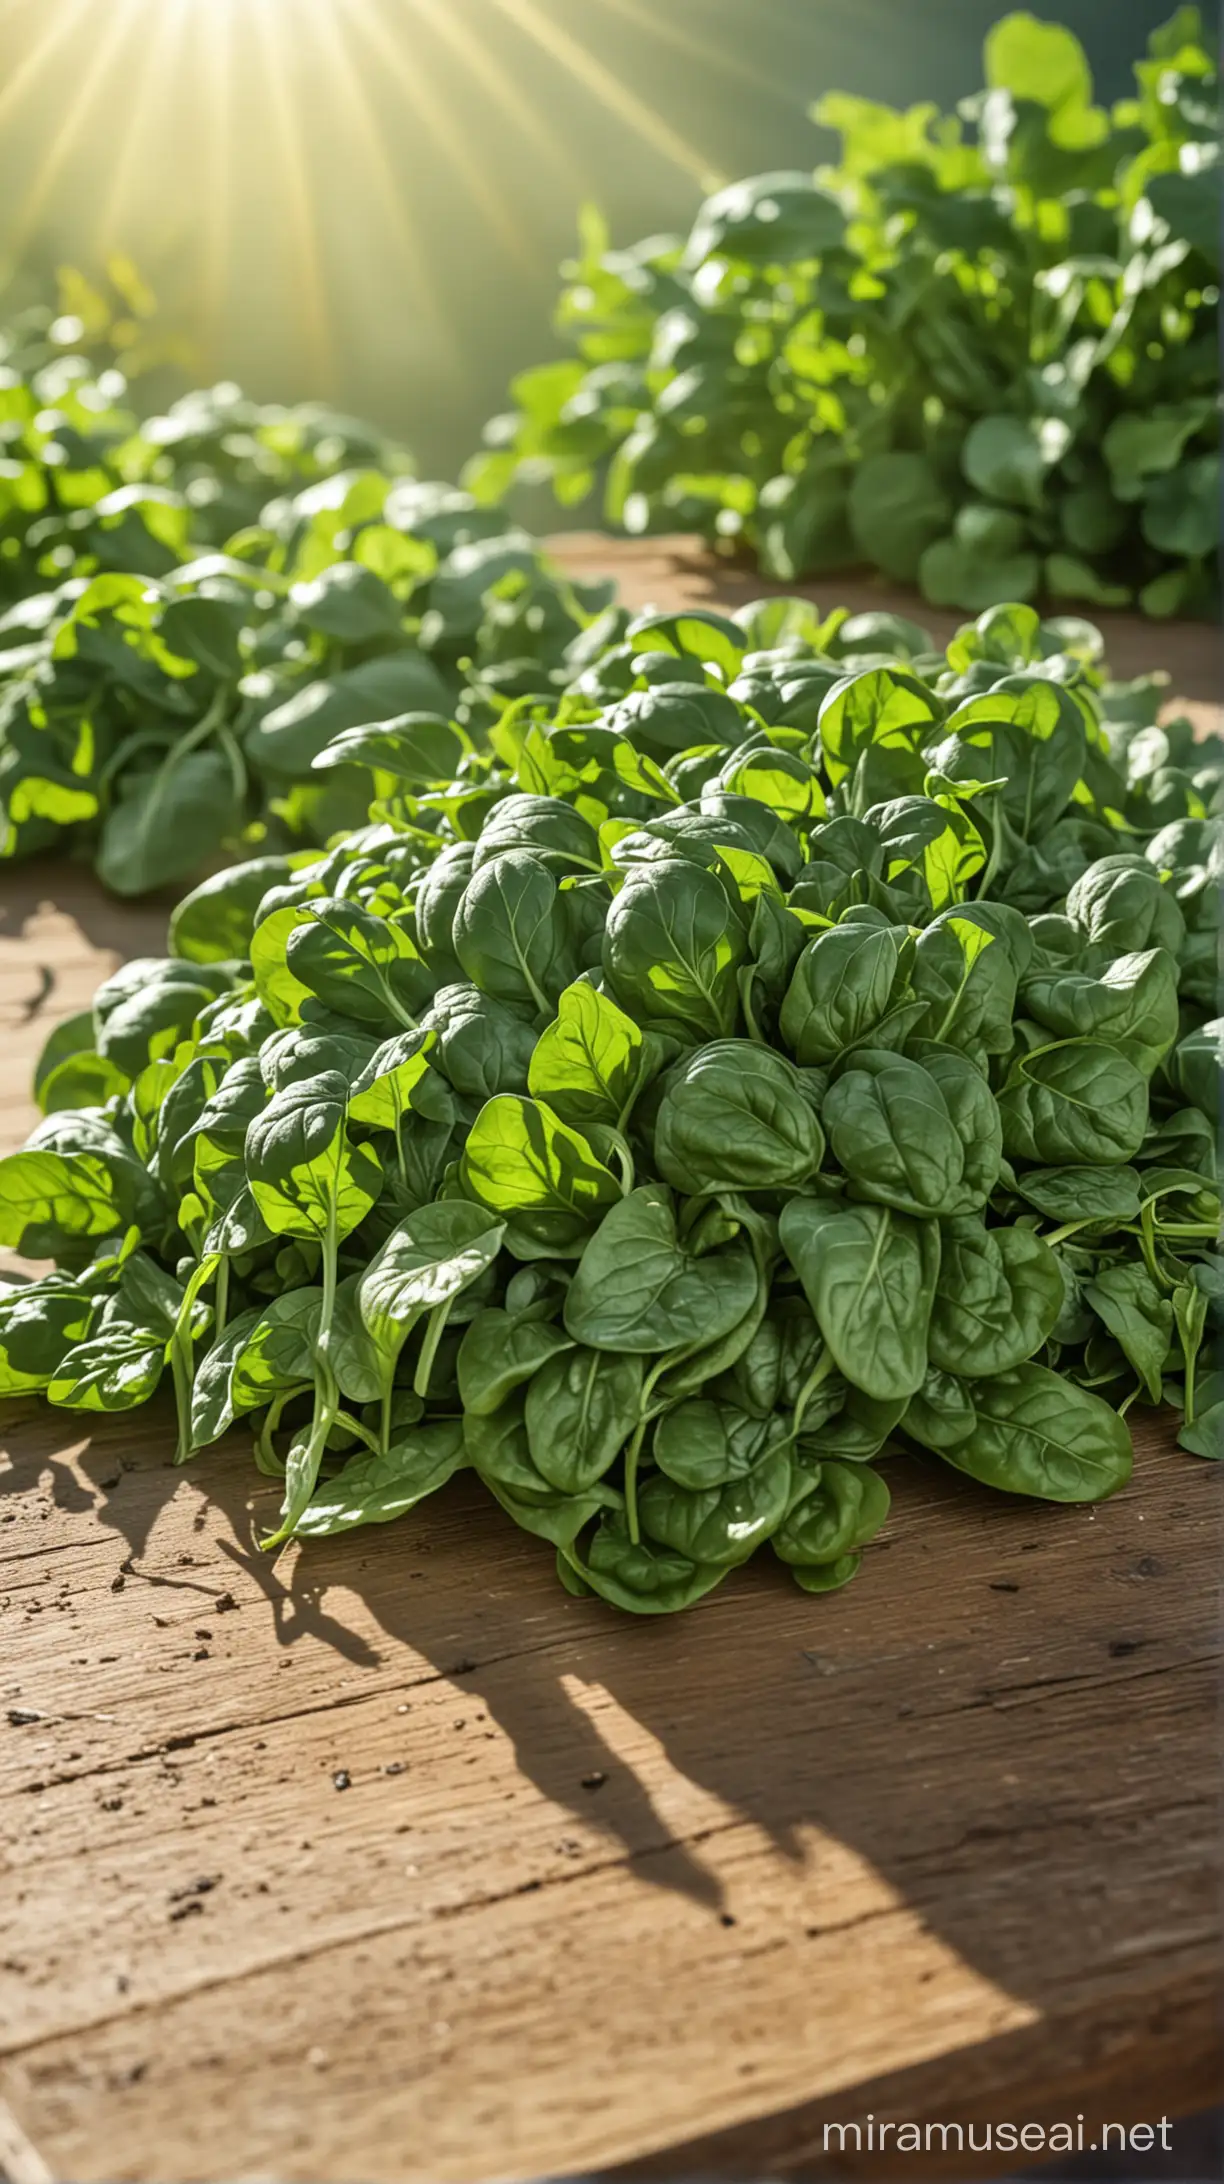 spinach on table, natural background, sun light effect, 4k, HDR, morning time weather
